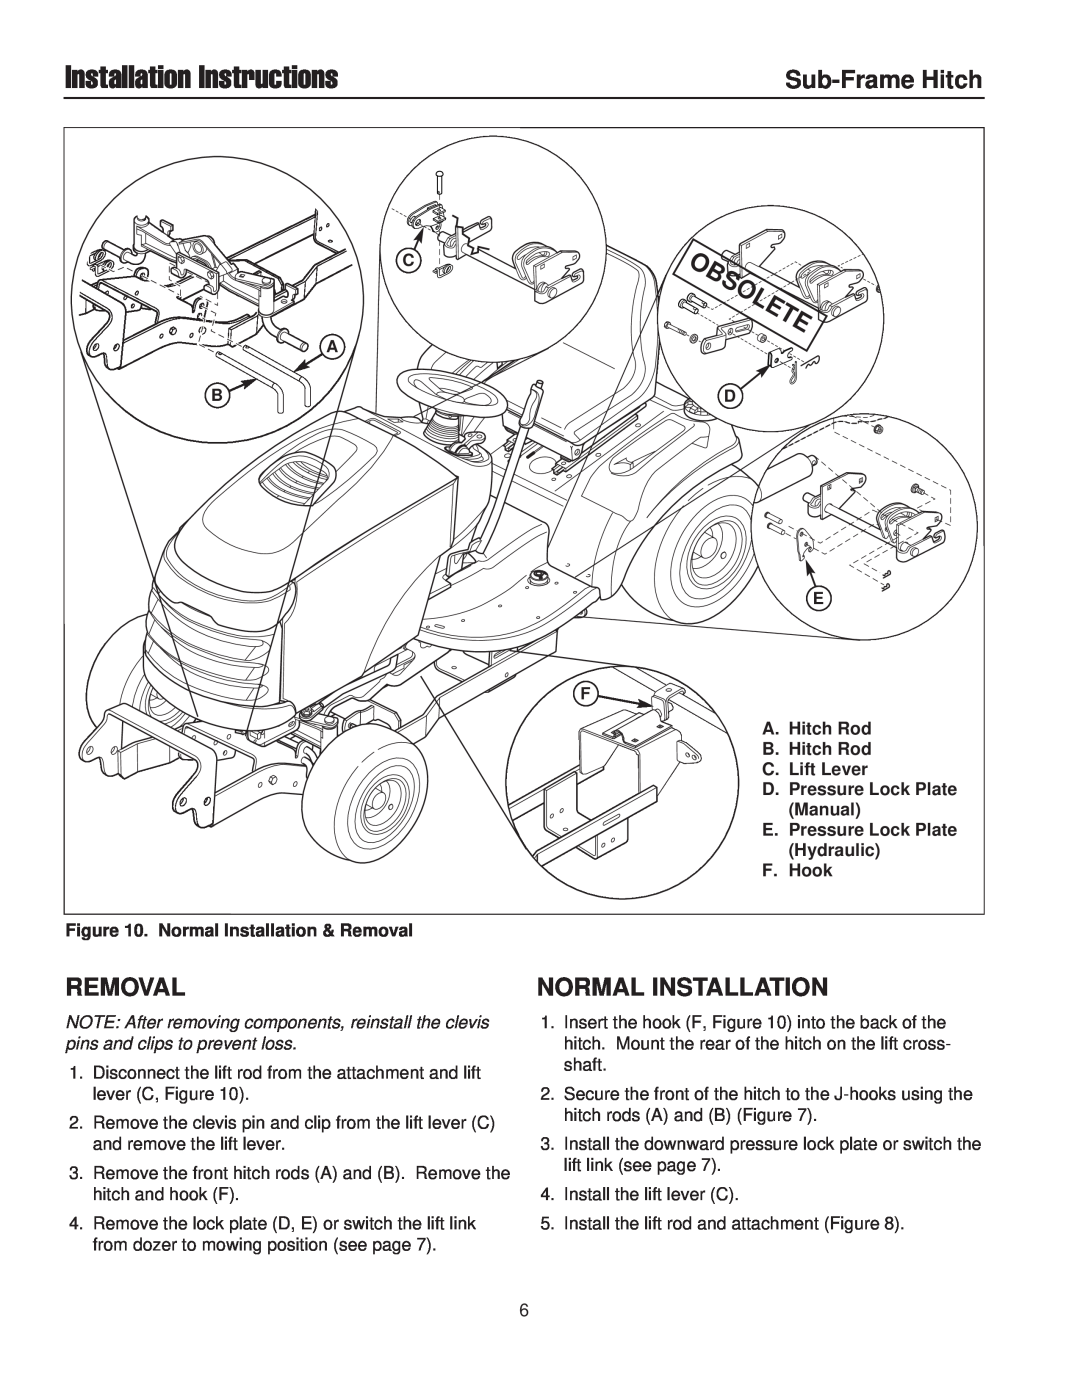 Snapper 1695195 installation instructions Removal, Normal Installation, Installation Instructions, Sub-Frame Hitch 